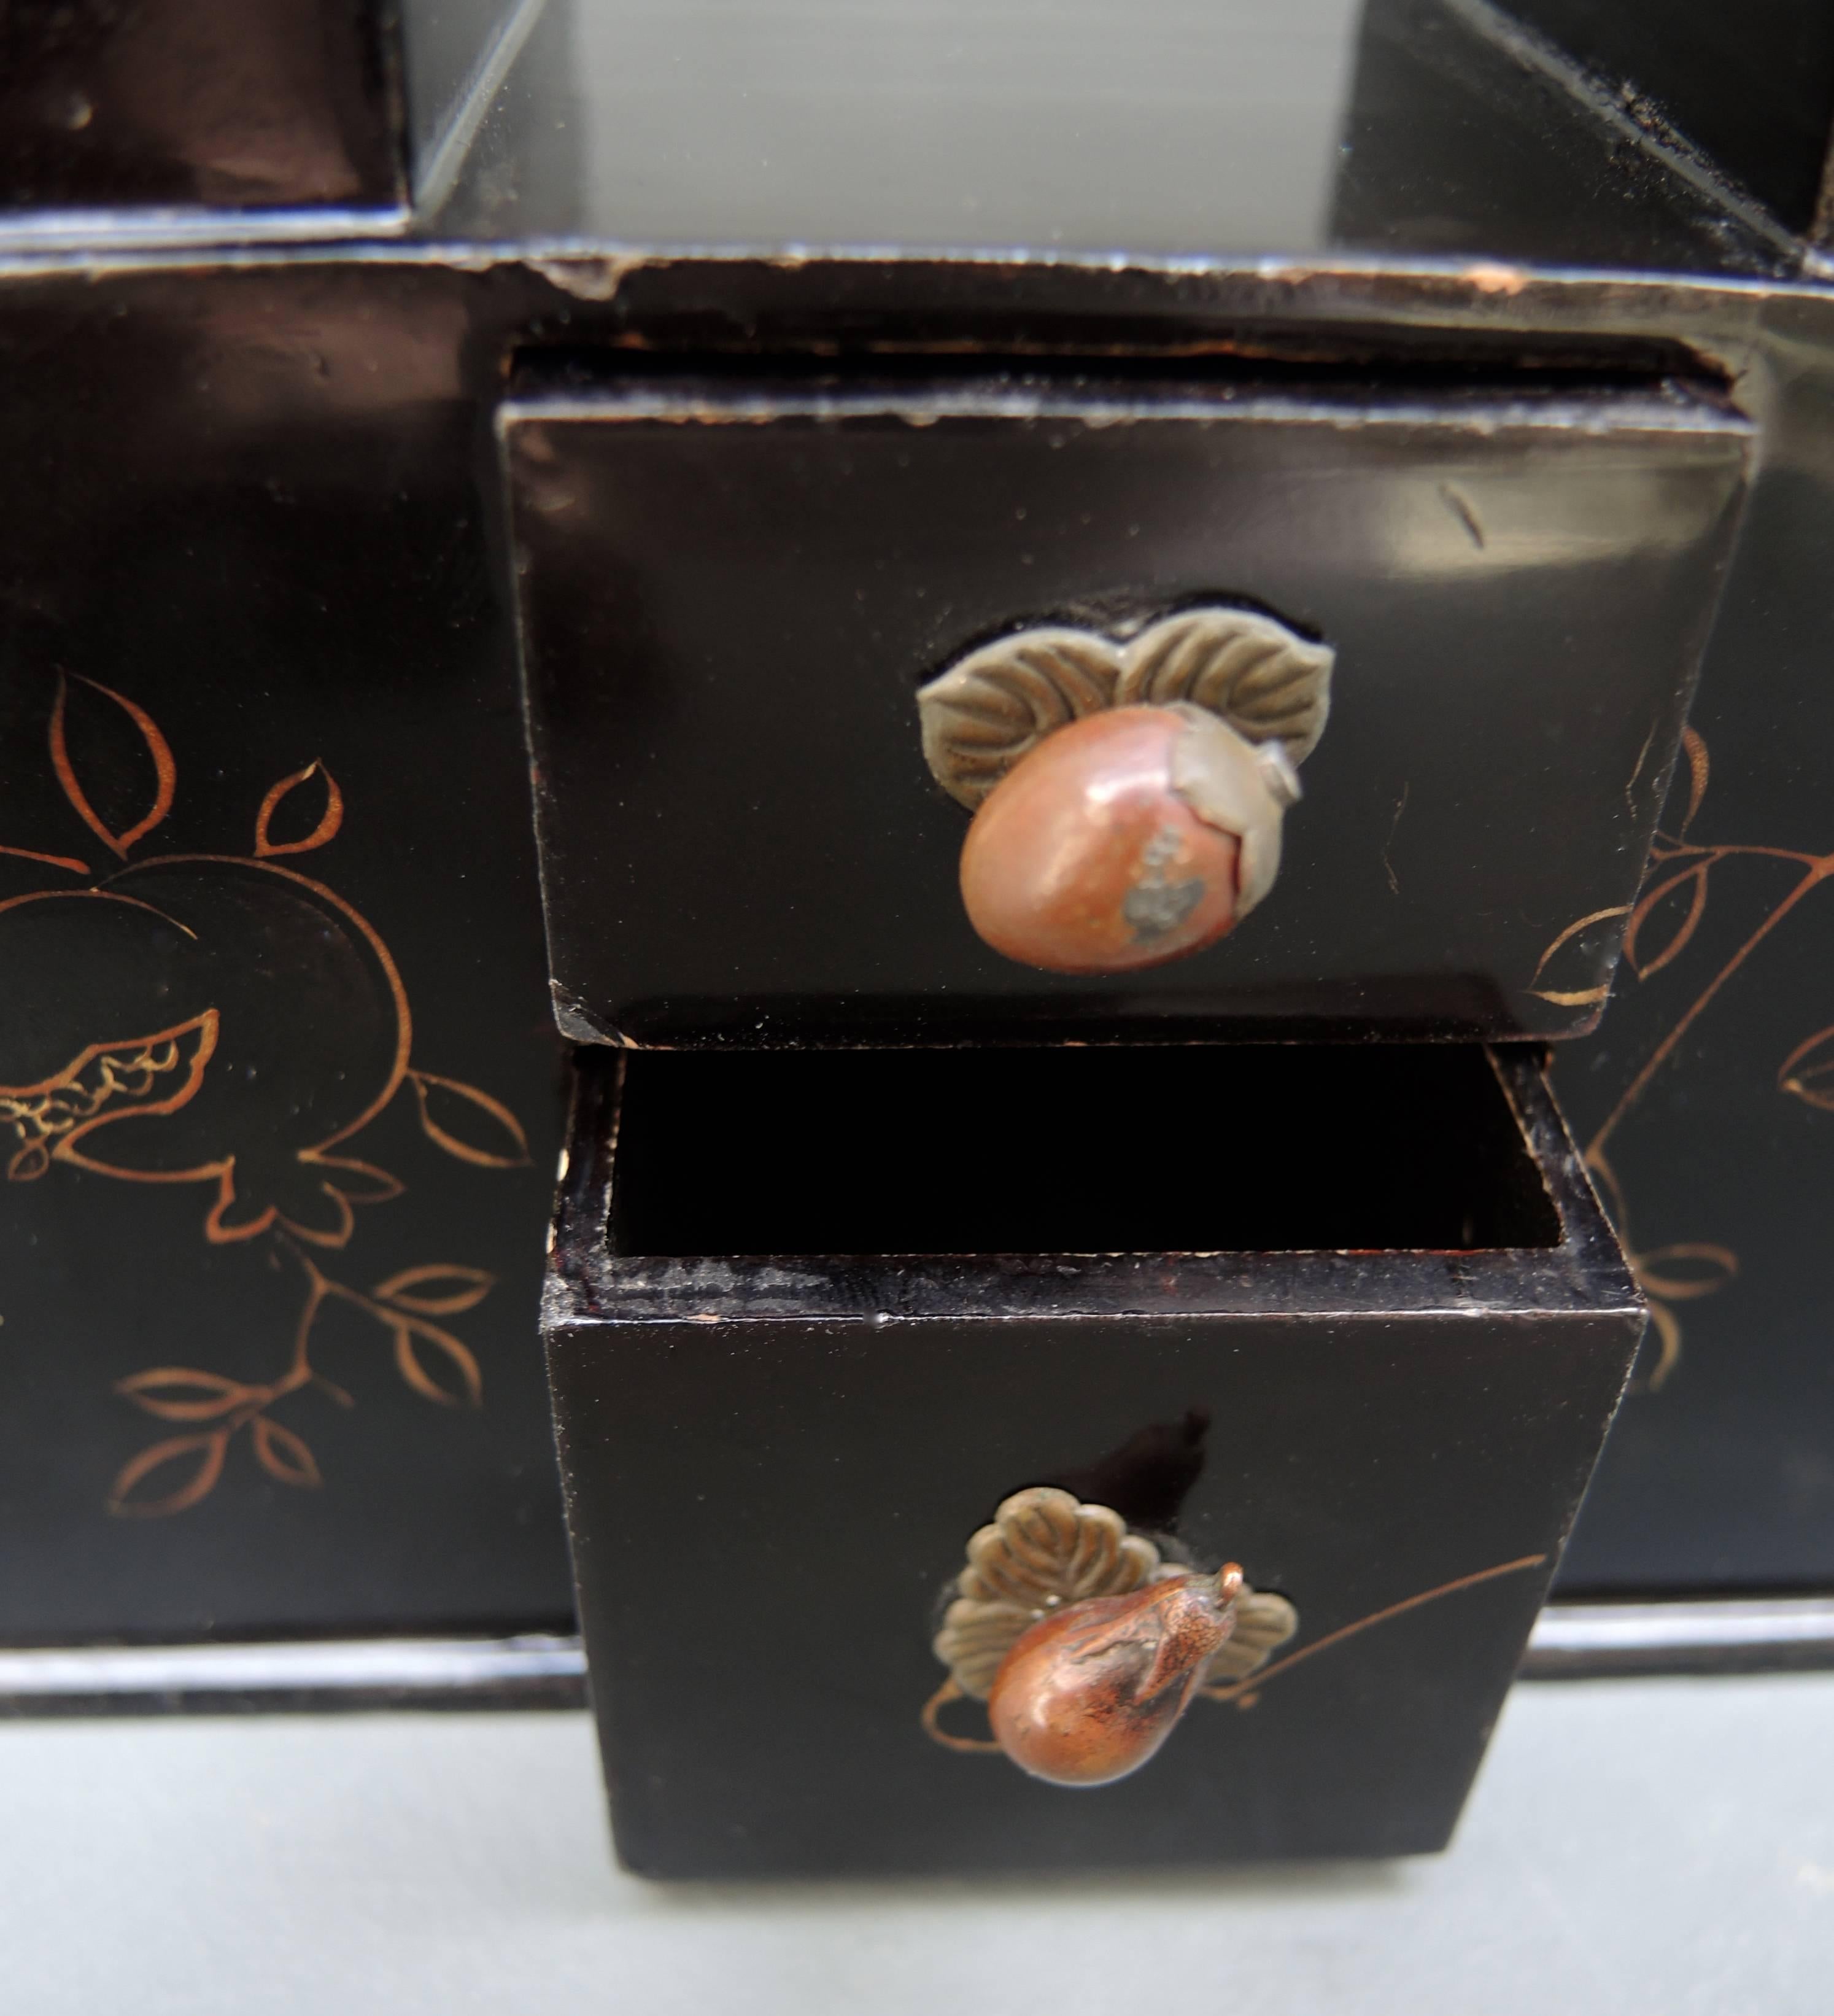 19th century lacquered card box with two drawers for dice or game pieces.
The drawer handles are finely cast in bronze and depict a persimmon and an eggplant. The depiction of the persimmon used in combination with other objects is to give good